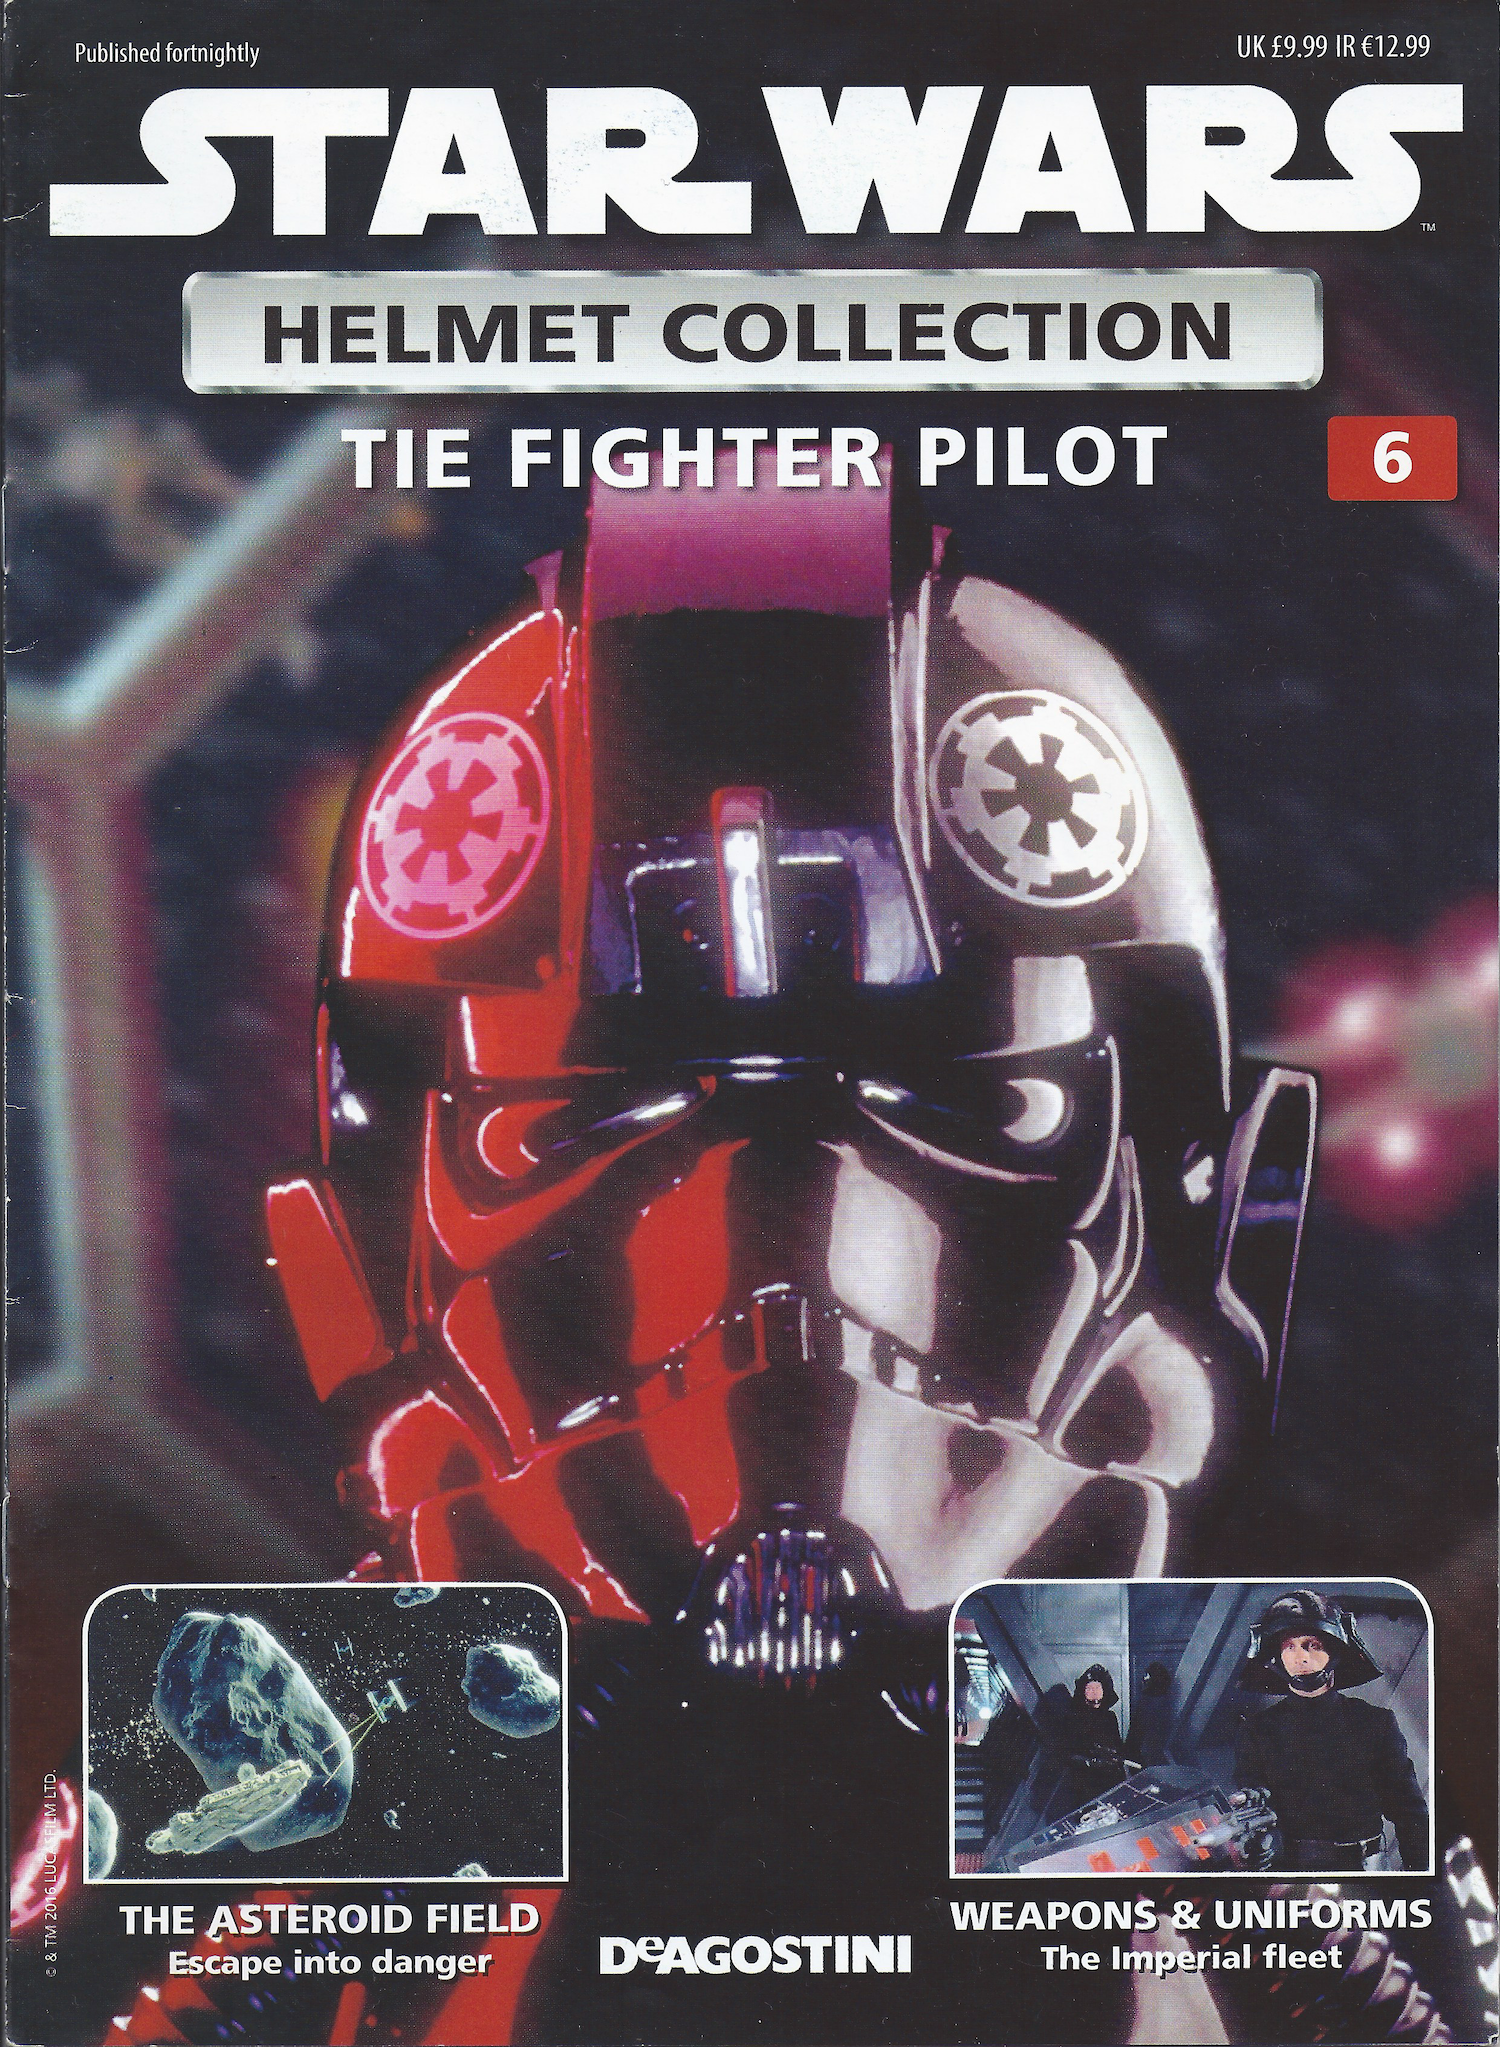 Meteor Maul Space Wars Helmet from the Stars